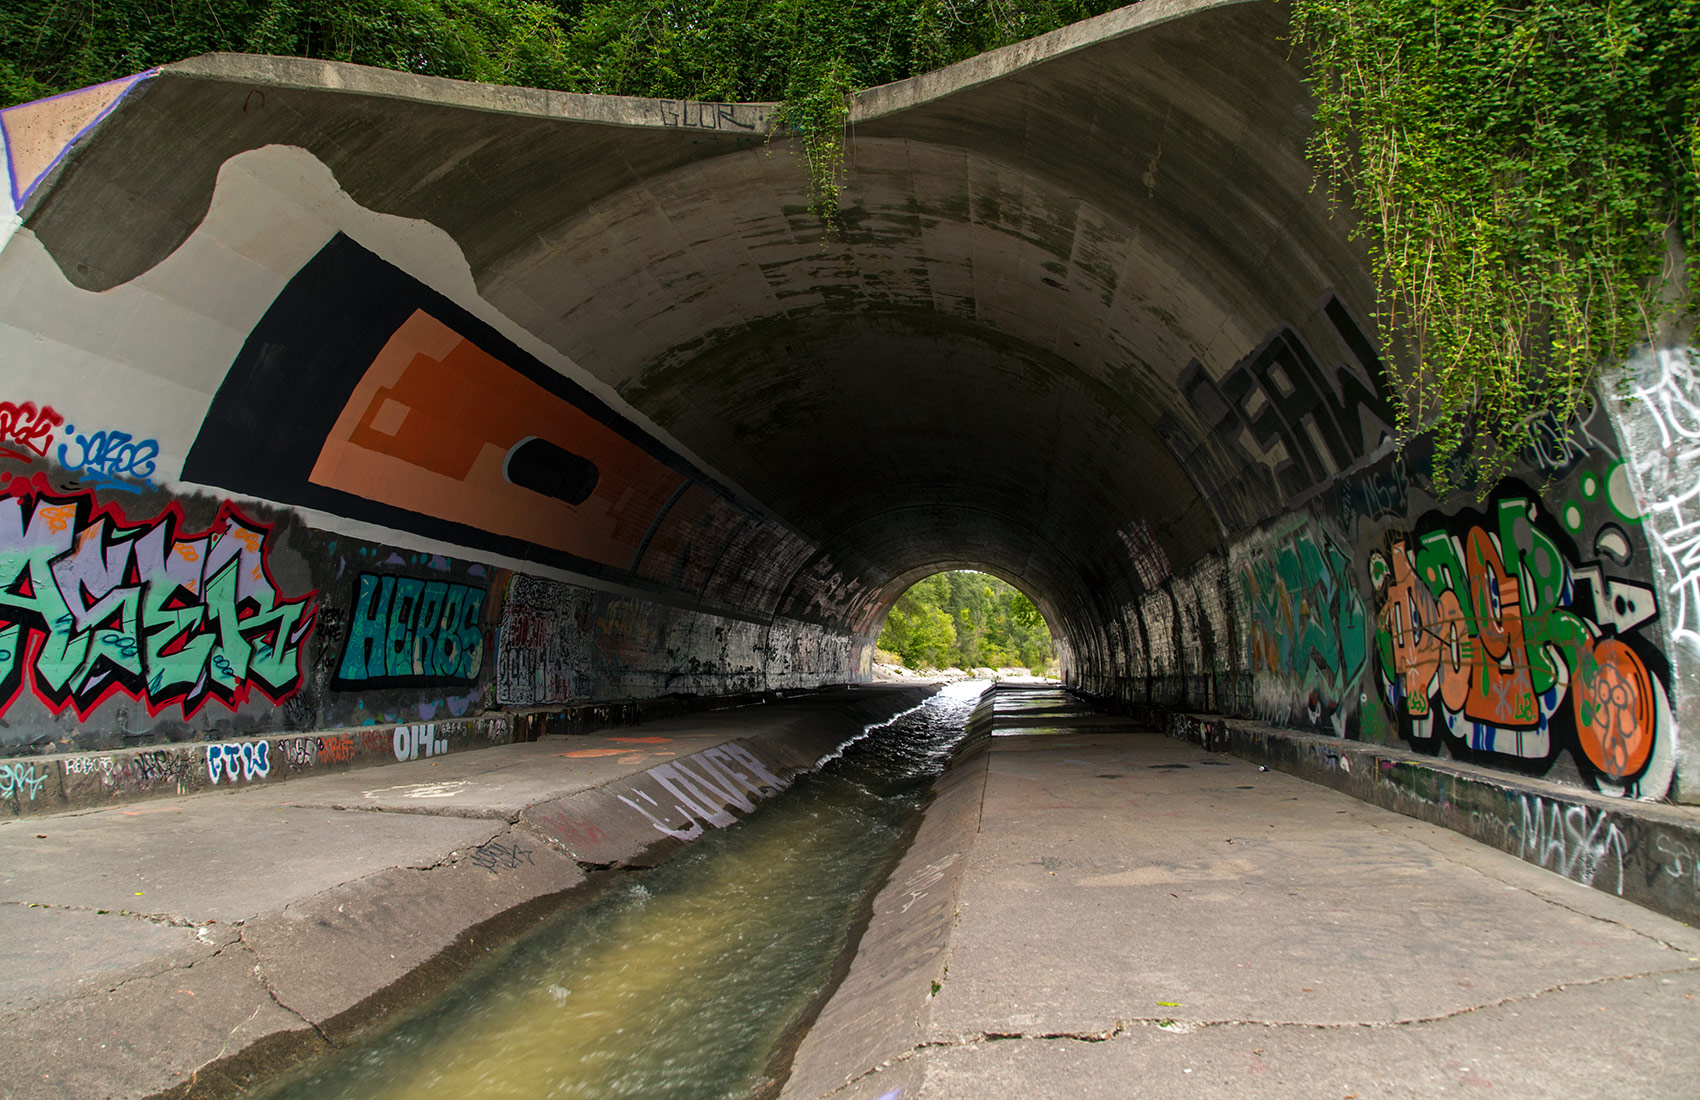 20140912. Toronto's very own chunnel can be found along Black Cr